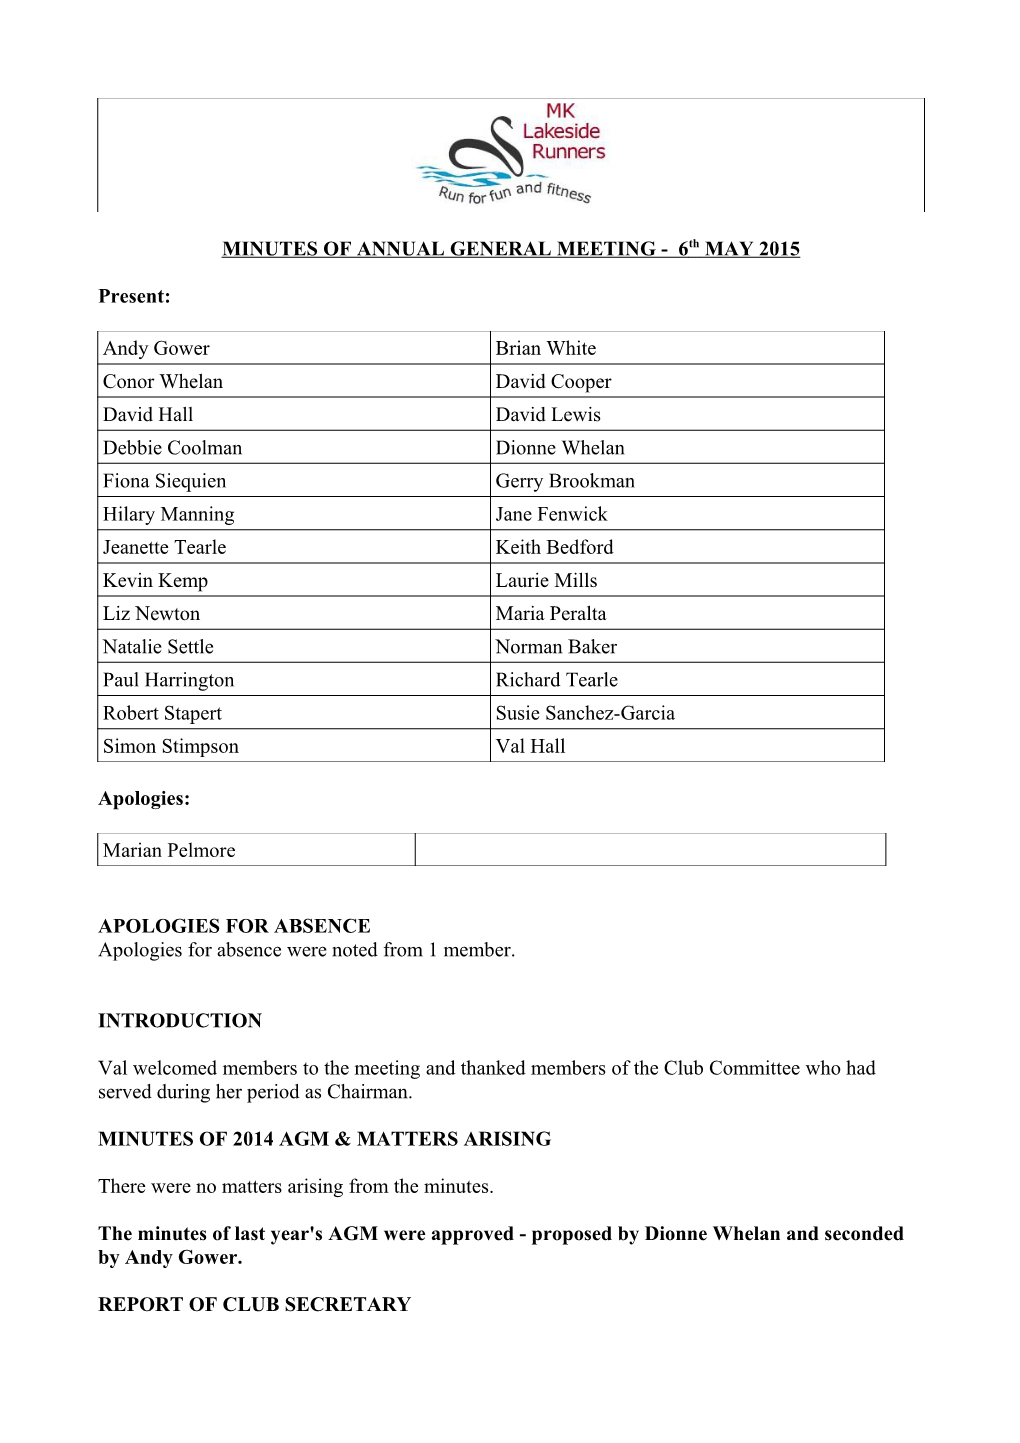 MINUTES of ANNUAL GENERAL MEETING - 6Th MAY 2015